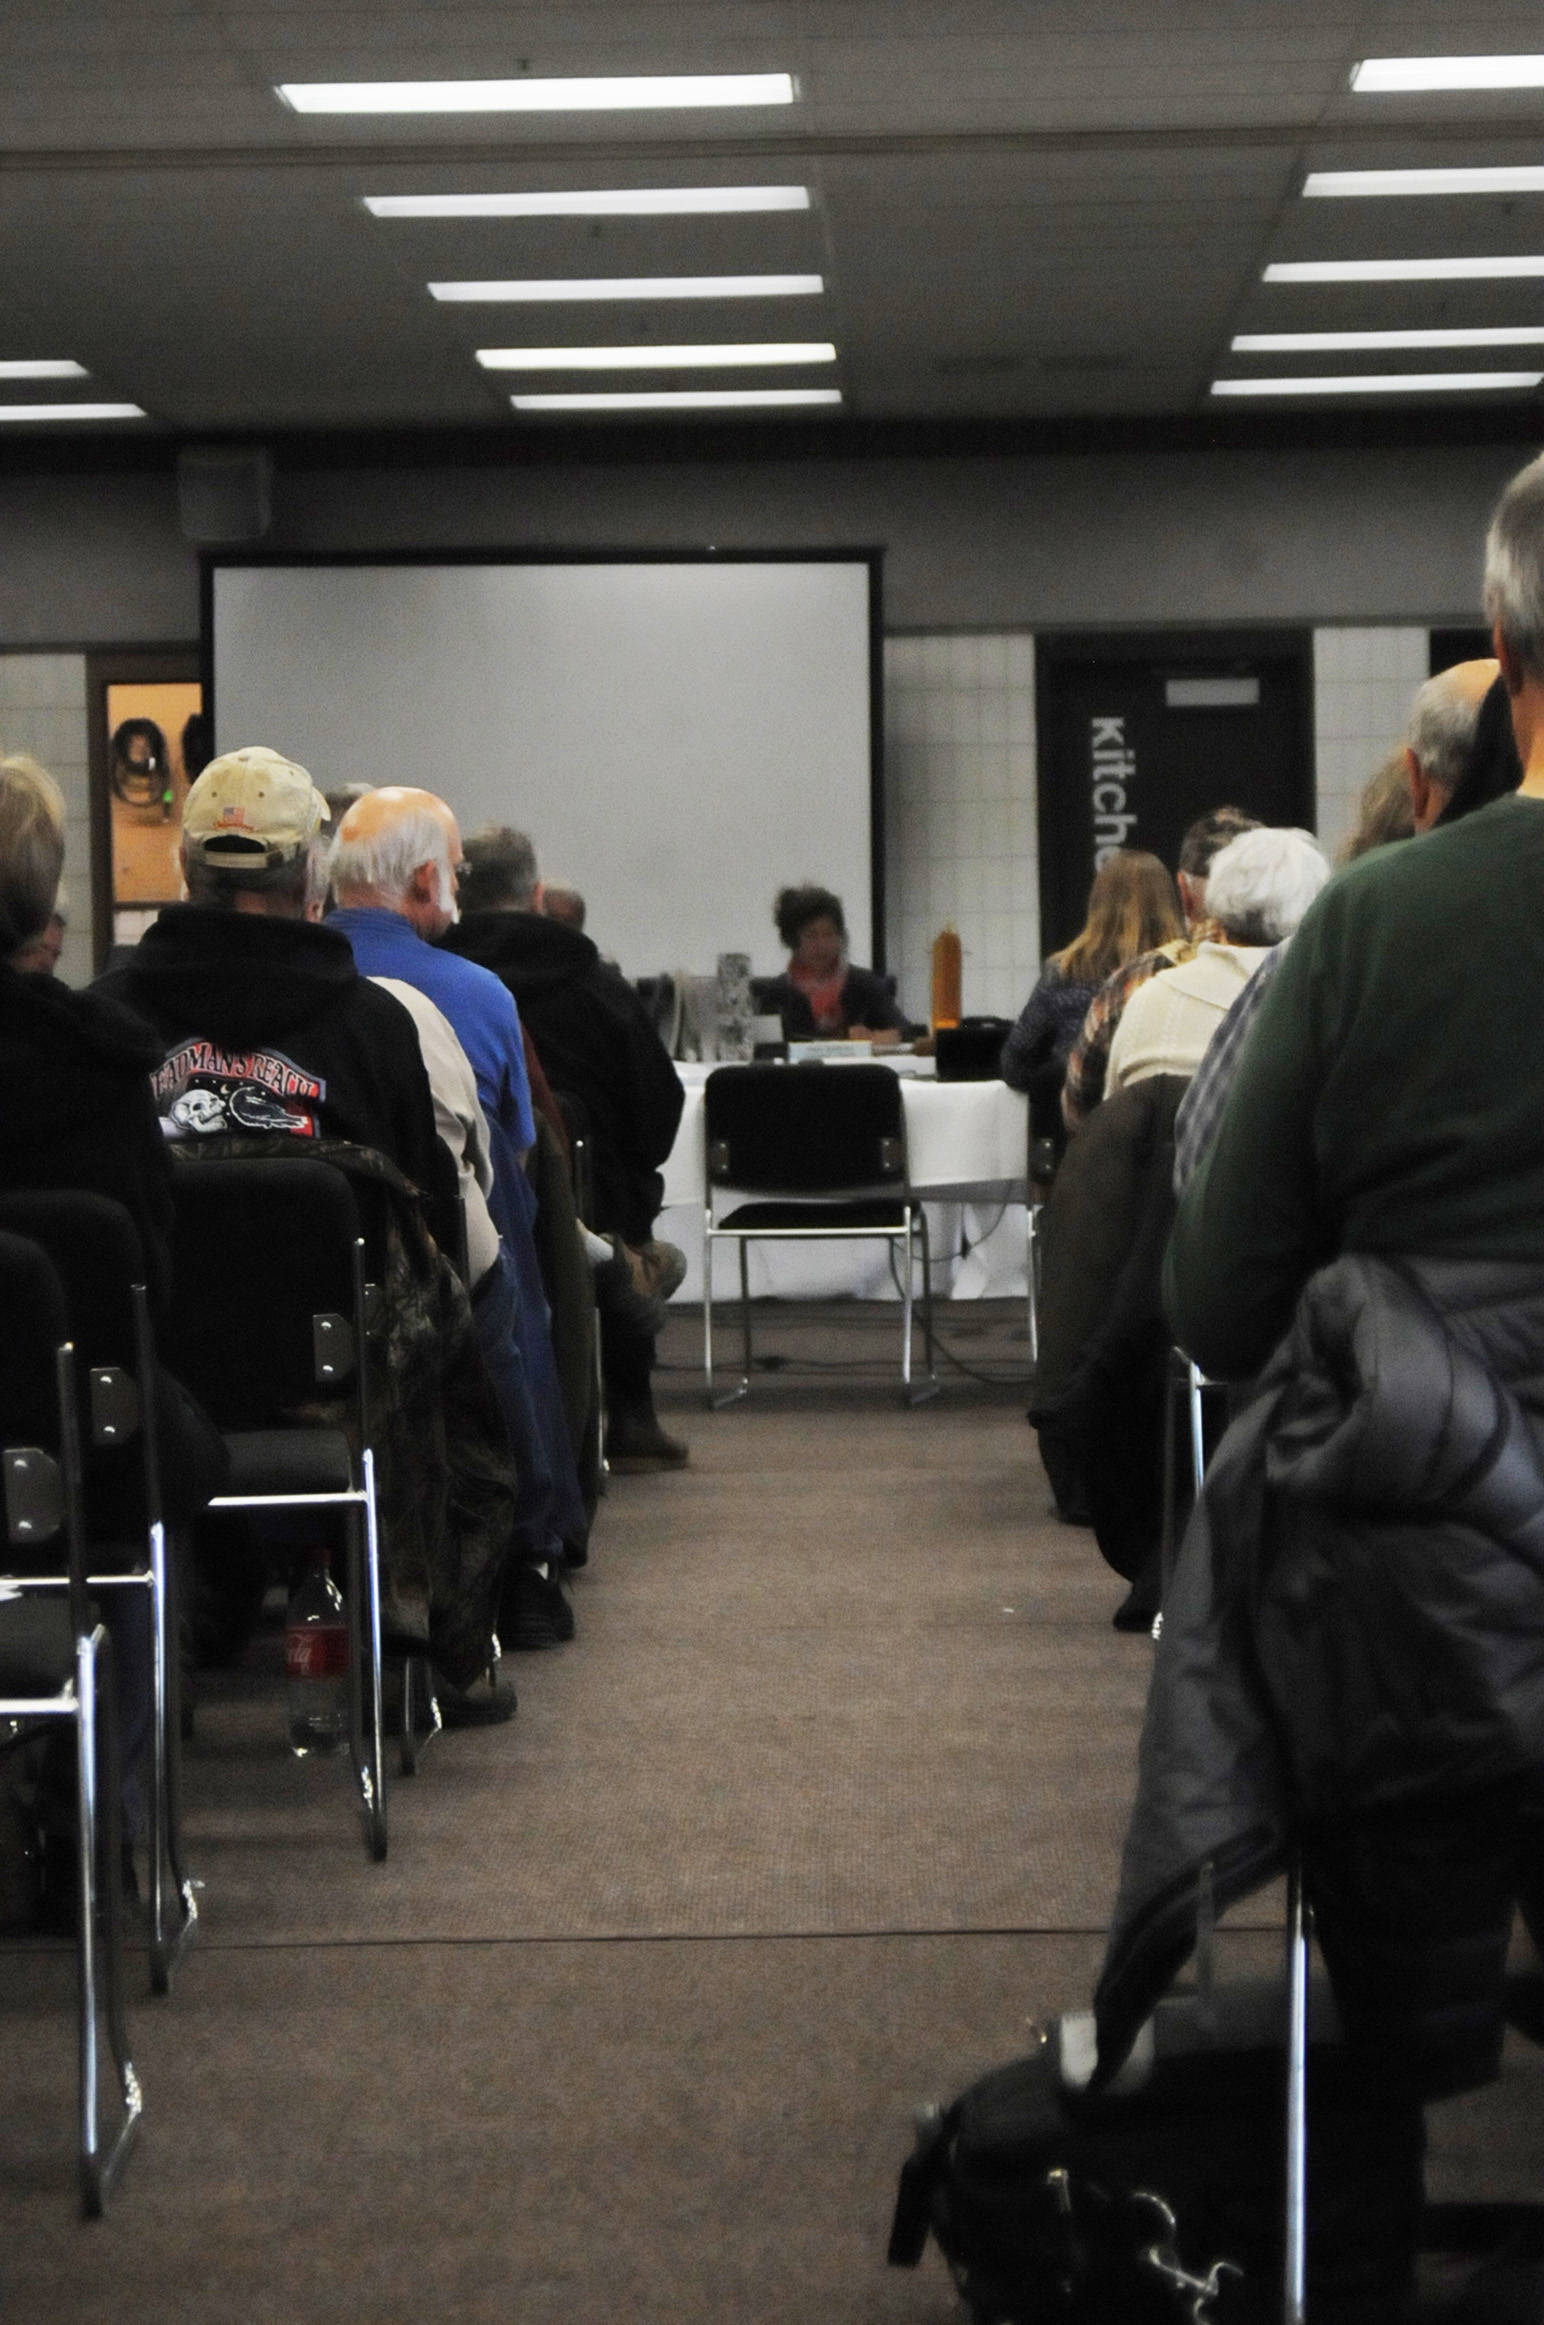 Dozens of people from around Alaska turned out for the Board of Fisheries’ worksession to comment on fisheries issues Oct. 17, 2016 in Soldotna. The board members decided Thursday not to host its 2020 Upper Cook Inlet meeting in Soldotna, opting instead for Anchorage, despite repeated requests from local governments and residents. (Photo by Elizabeth Earl/Peninsula Clarion, file)